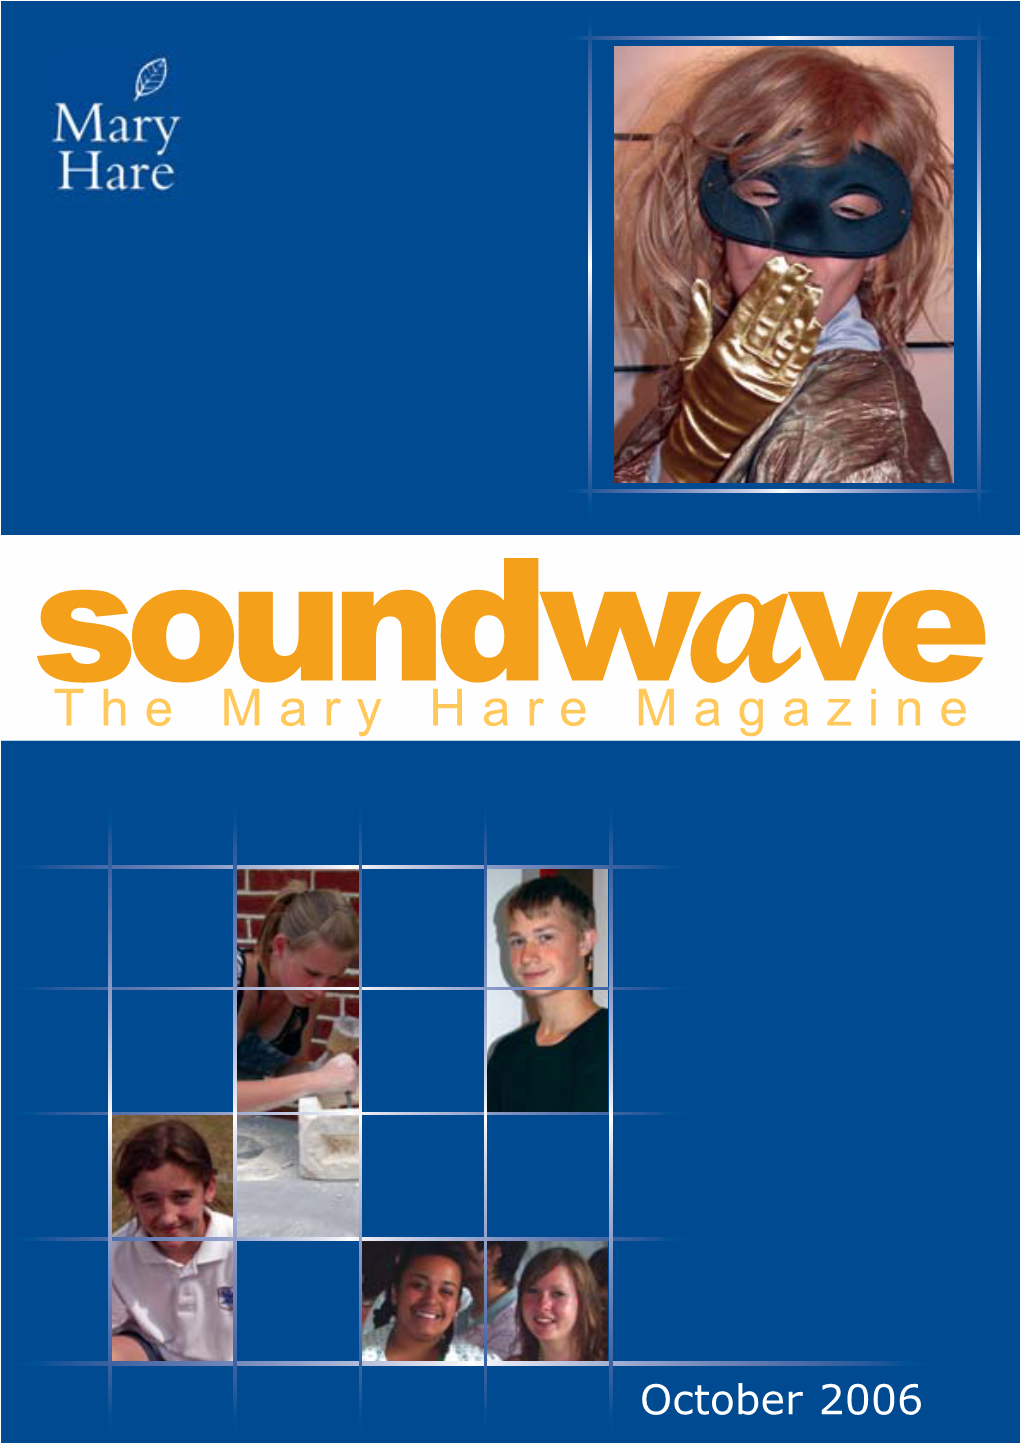 3424-Mary Hare-Soundwave Oct 06.Qxp